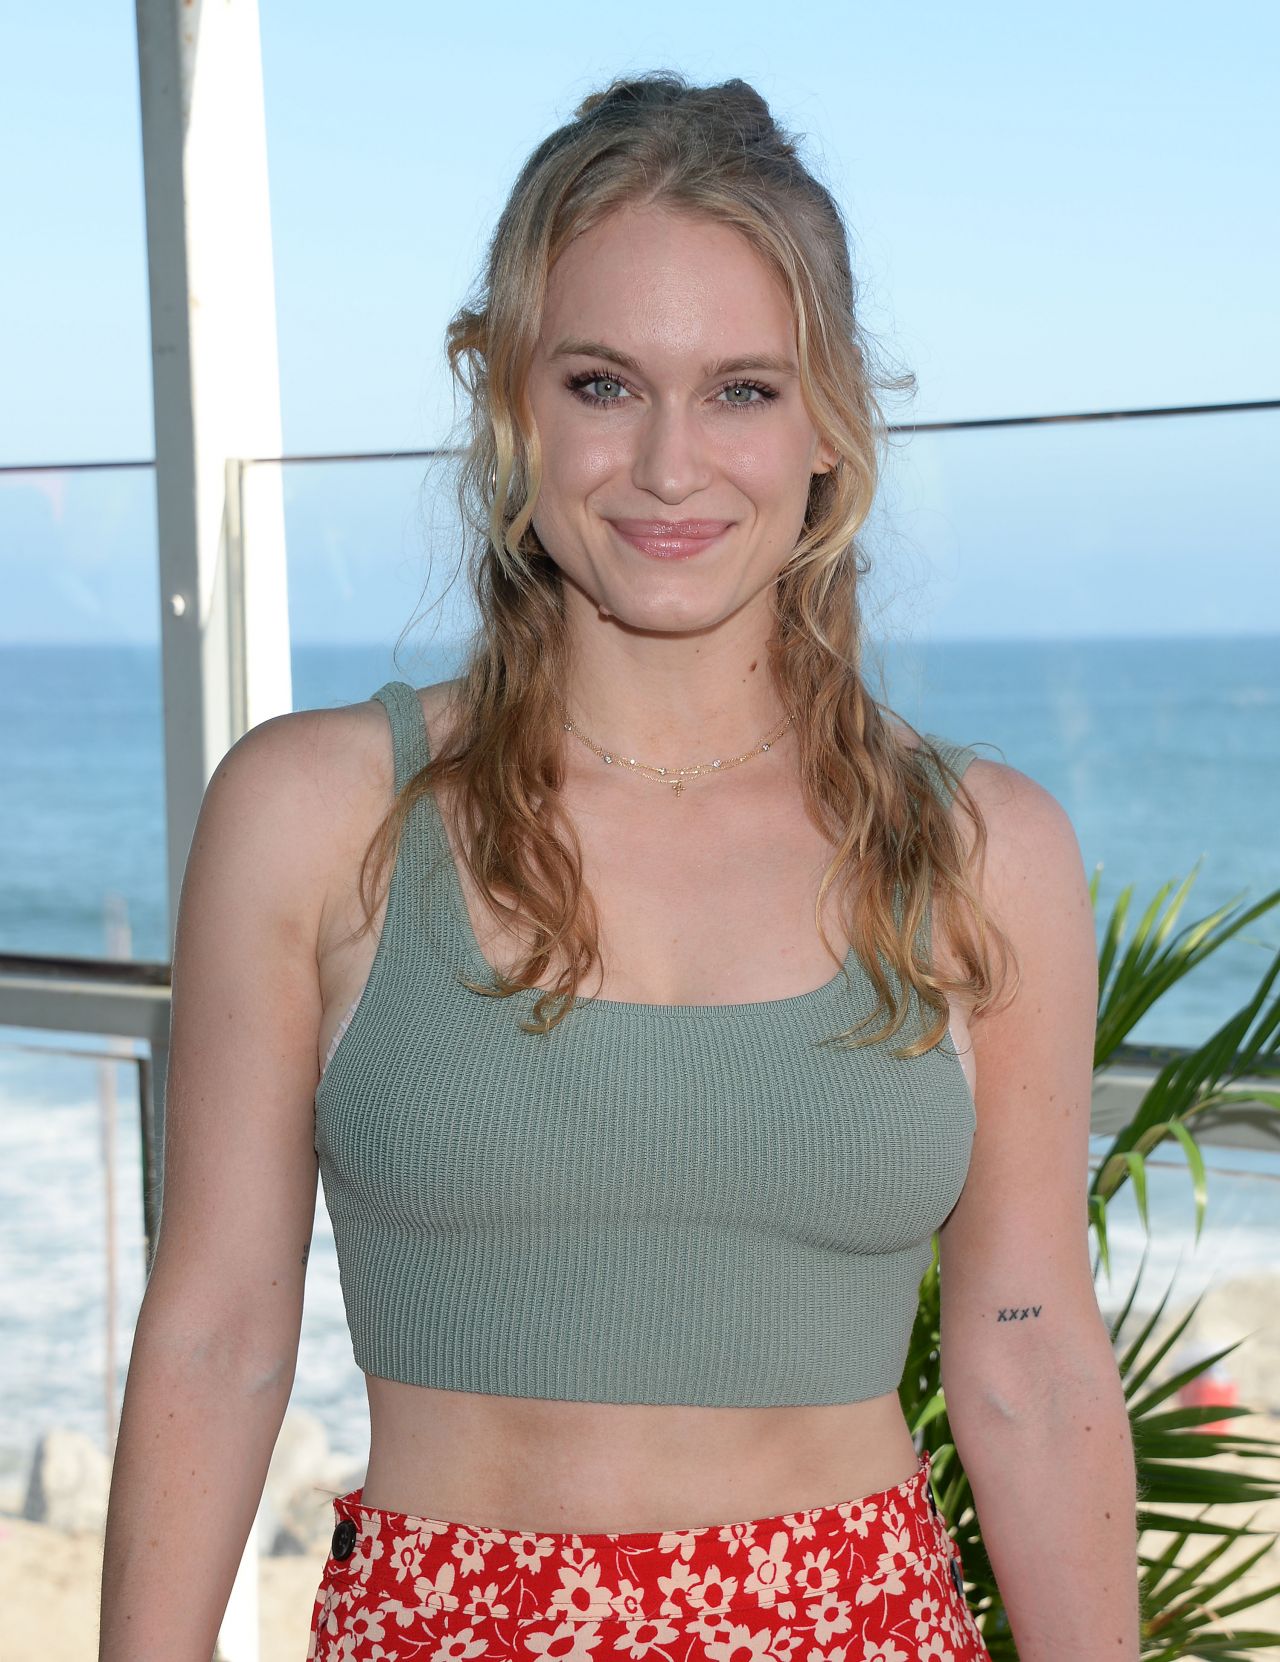 leven-rambin-2019-instagram-instabeach-party-in-pacific-palisades